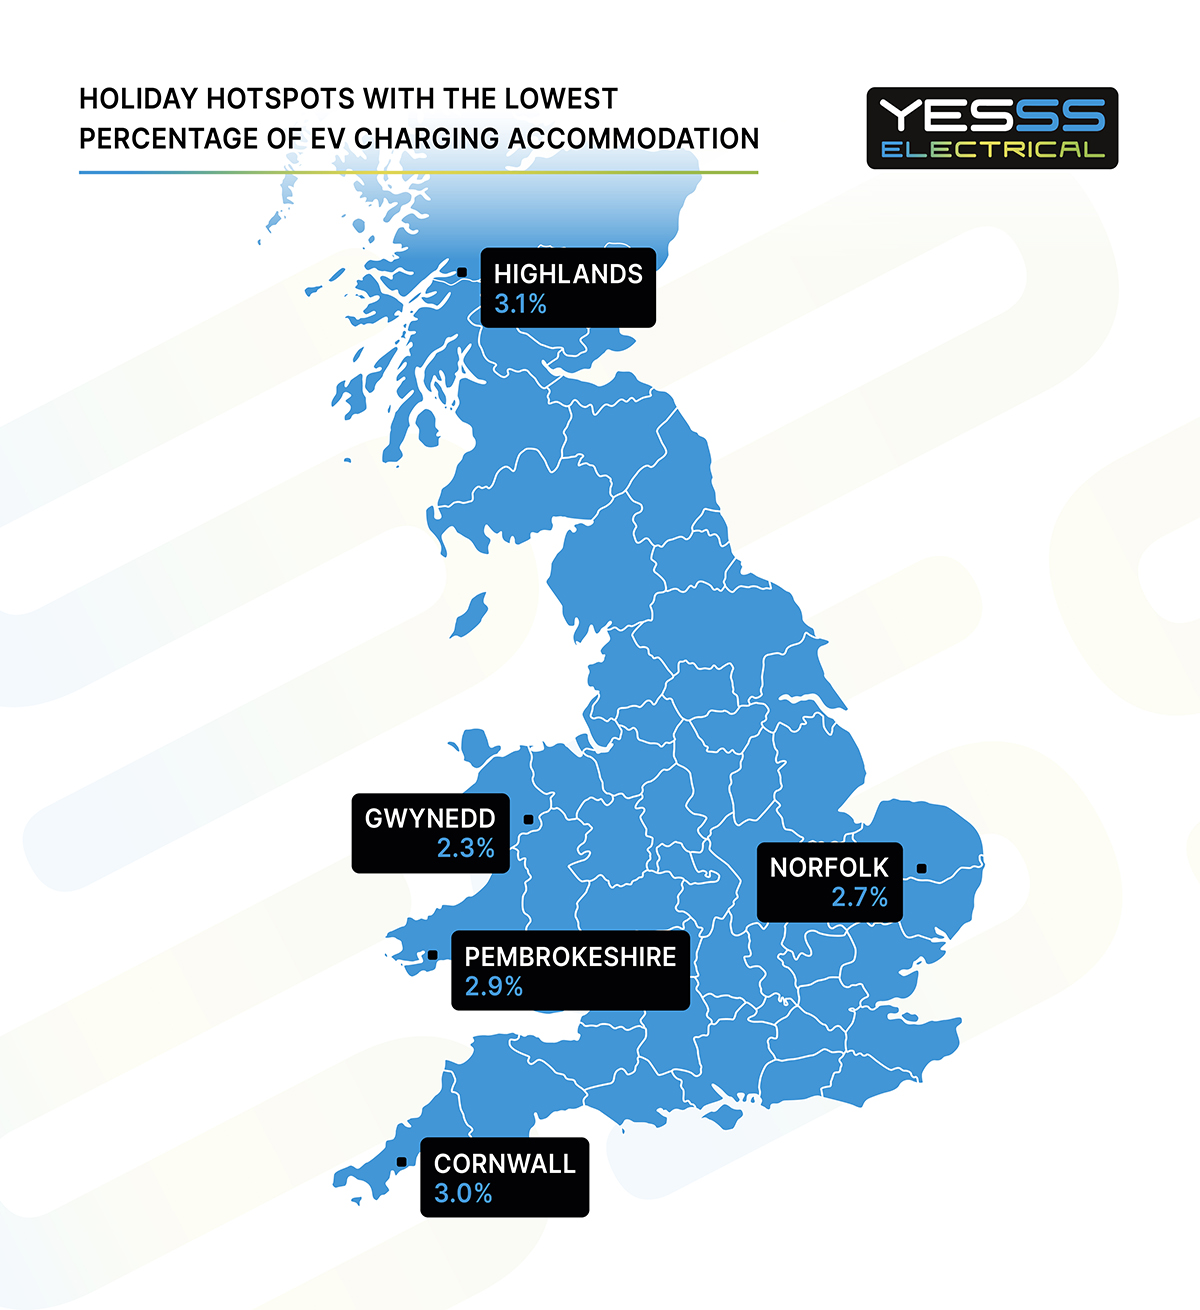 Which locations have the lowest amount of accomodation with EV charging?